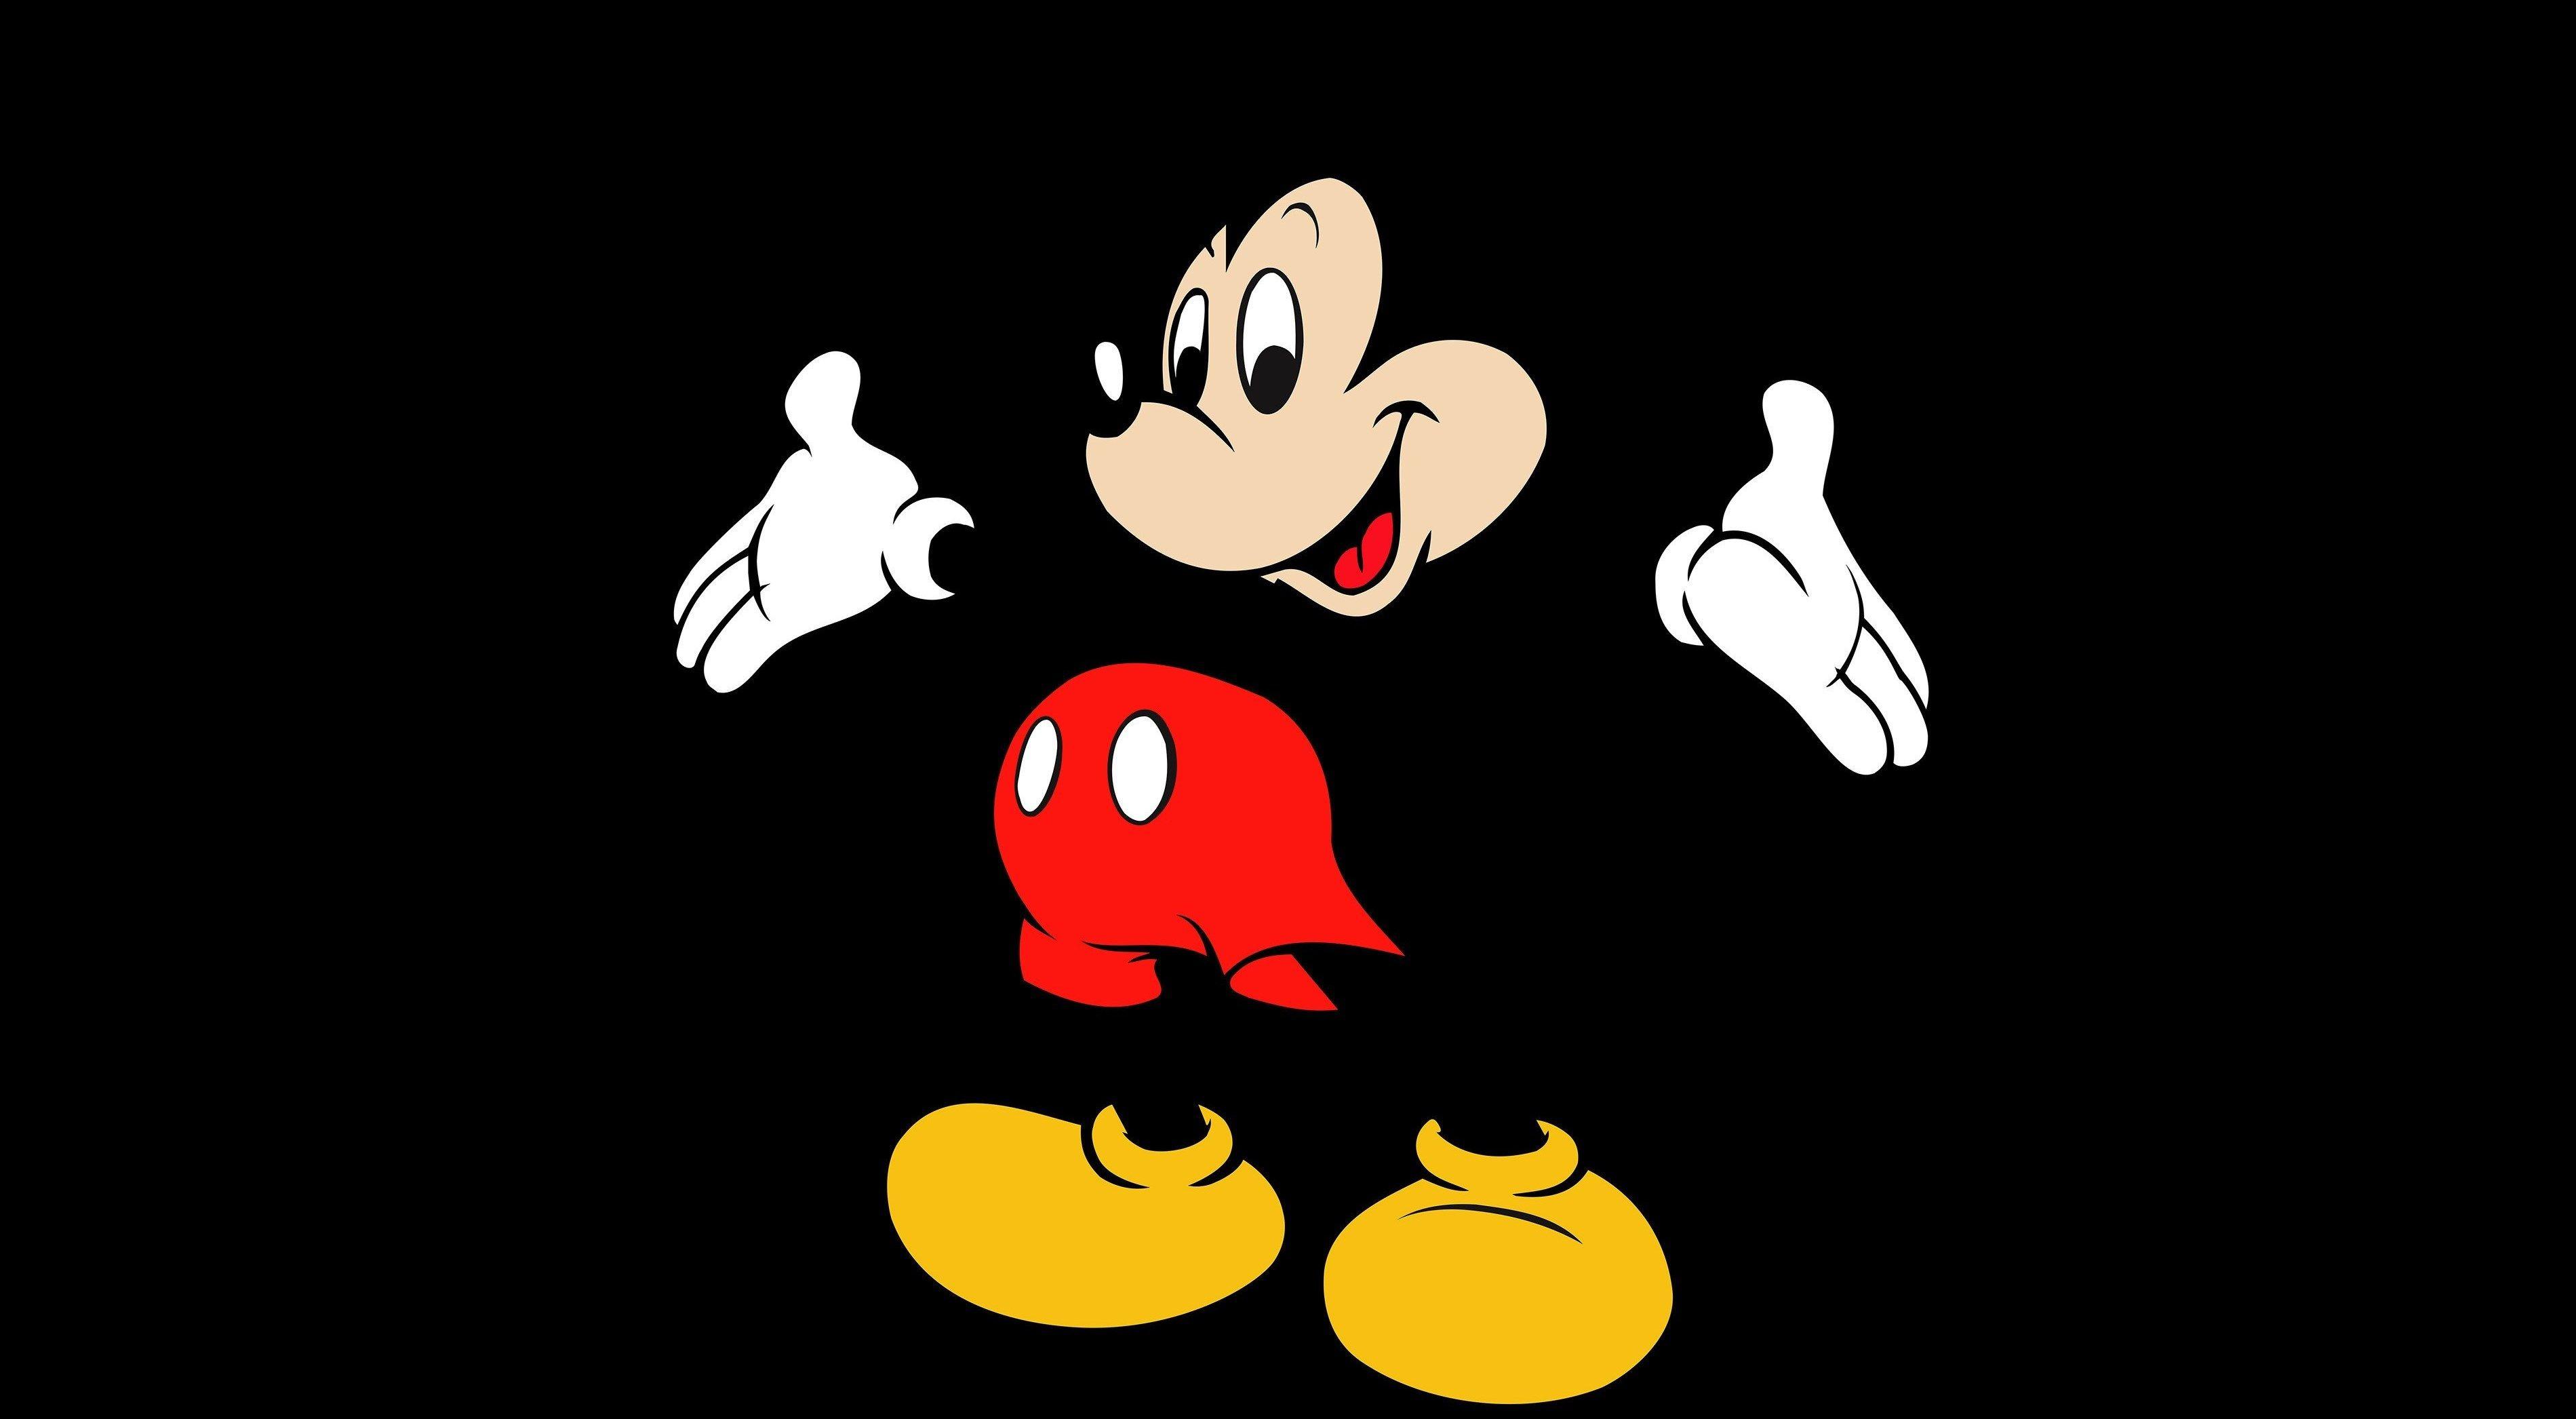 Popular cartoon character Mickey Mouse on a black background